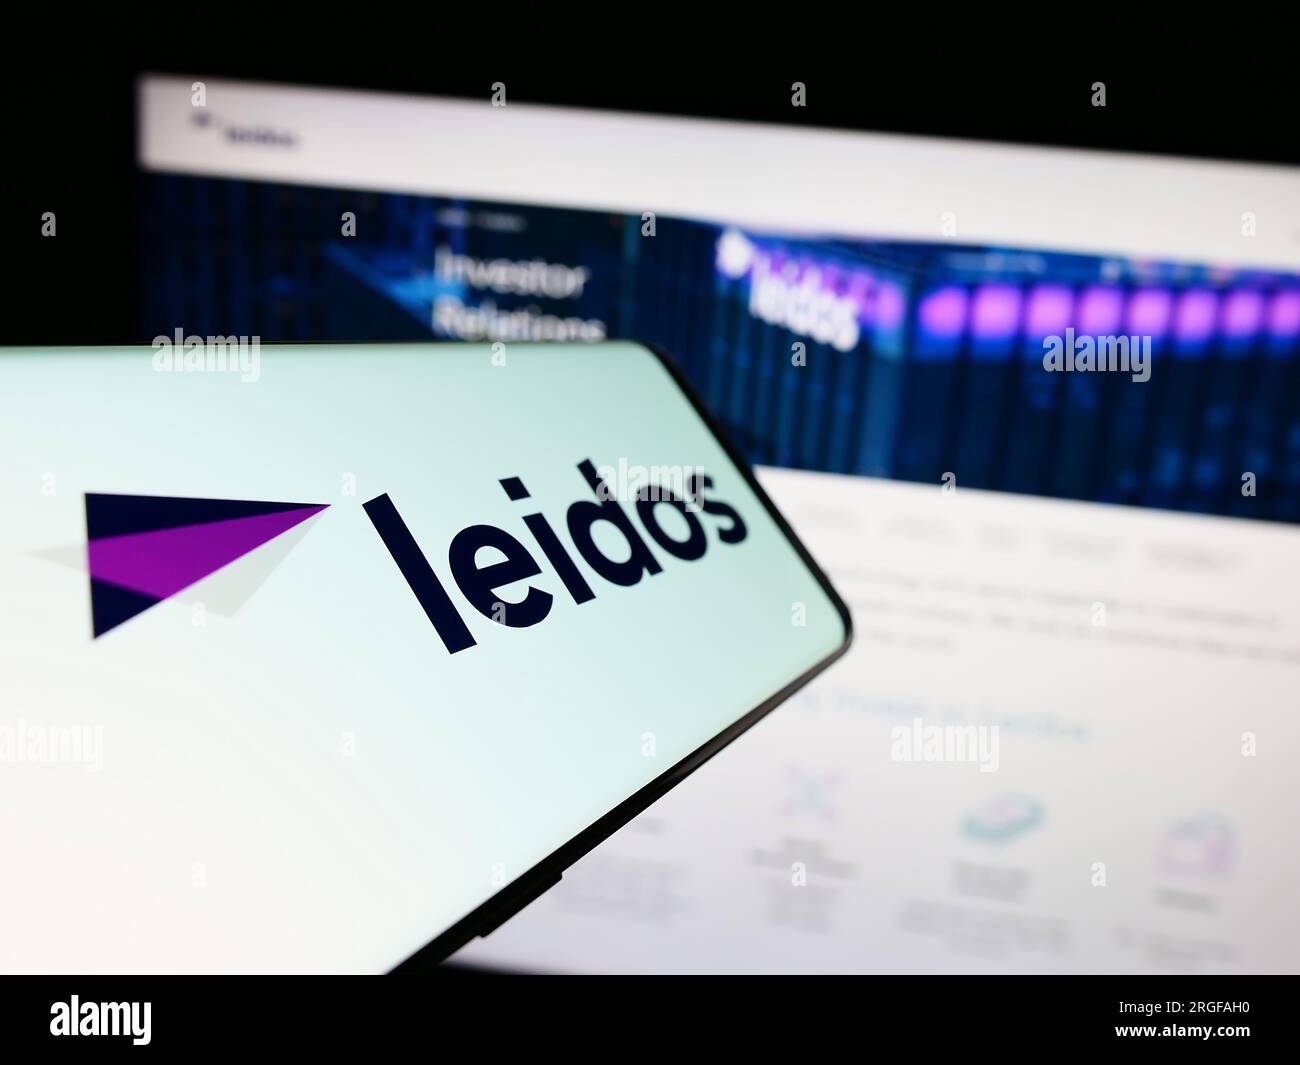 Smartphone with logo of American defense company Leidos Inc. on screen in front of business website. Focus on center-left of phone display. Stock Photo